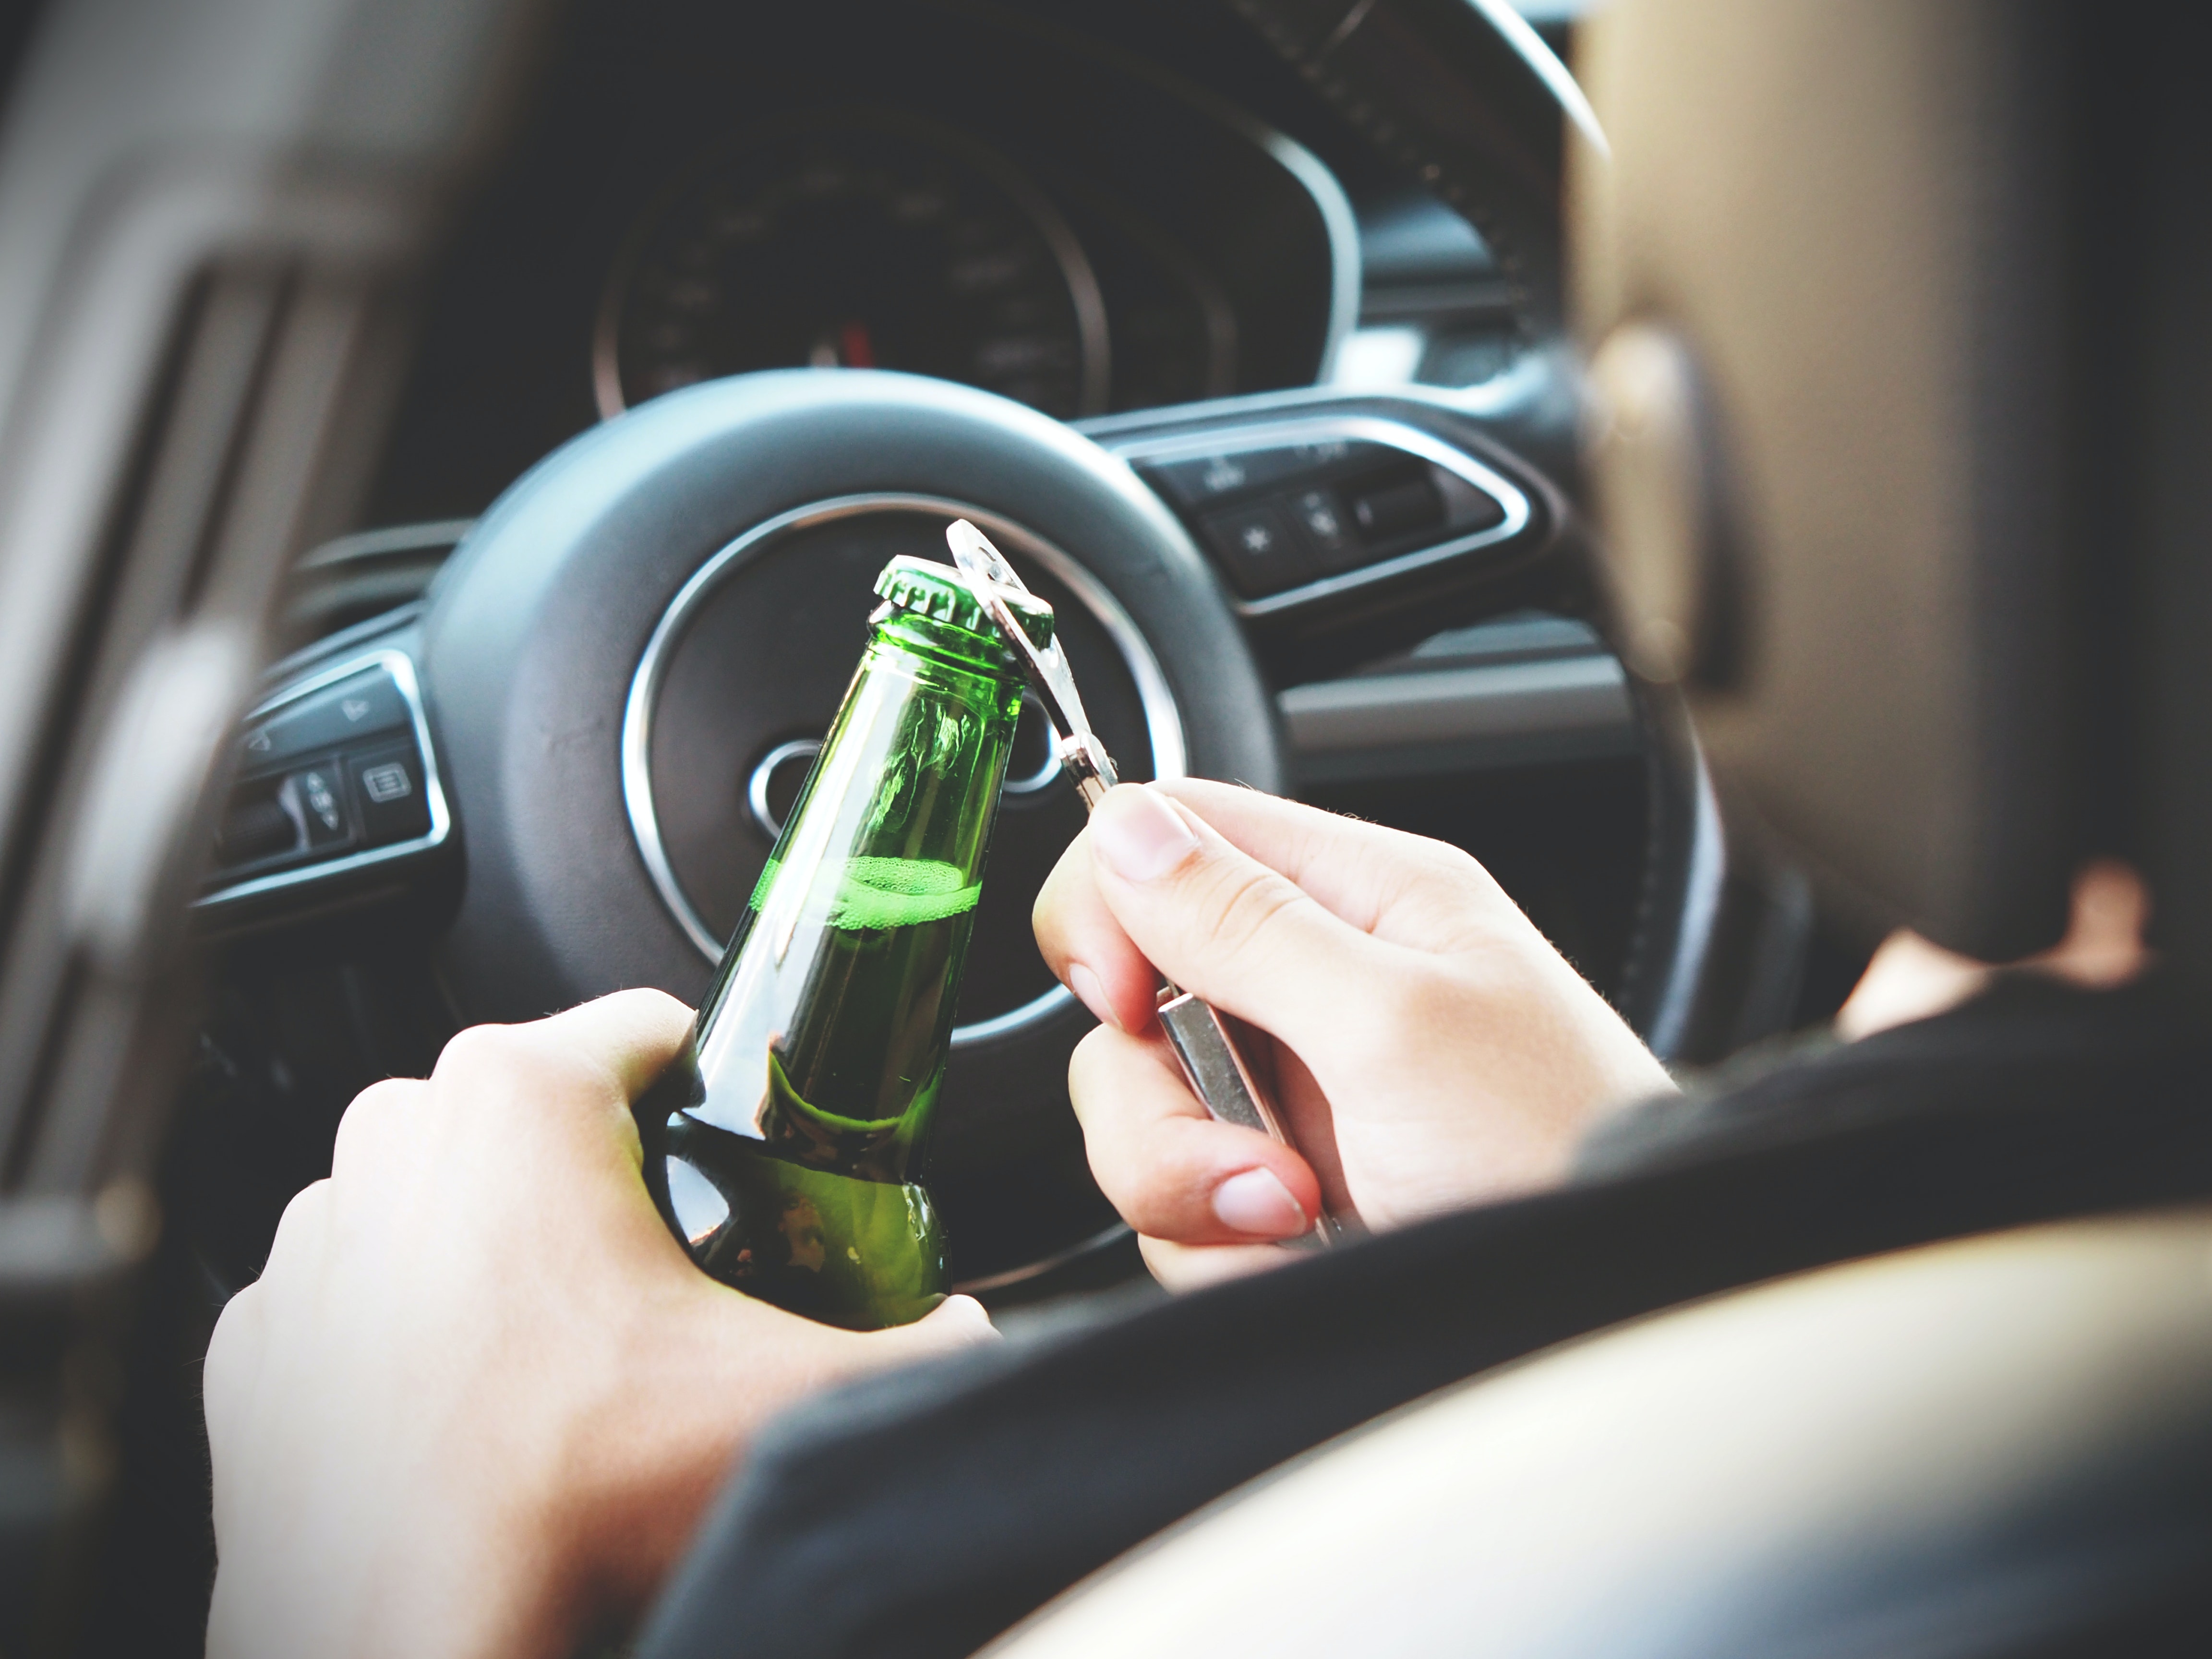 Arrested for DWI in Texas: What to Expect